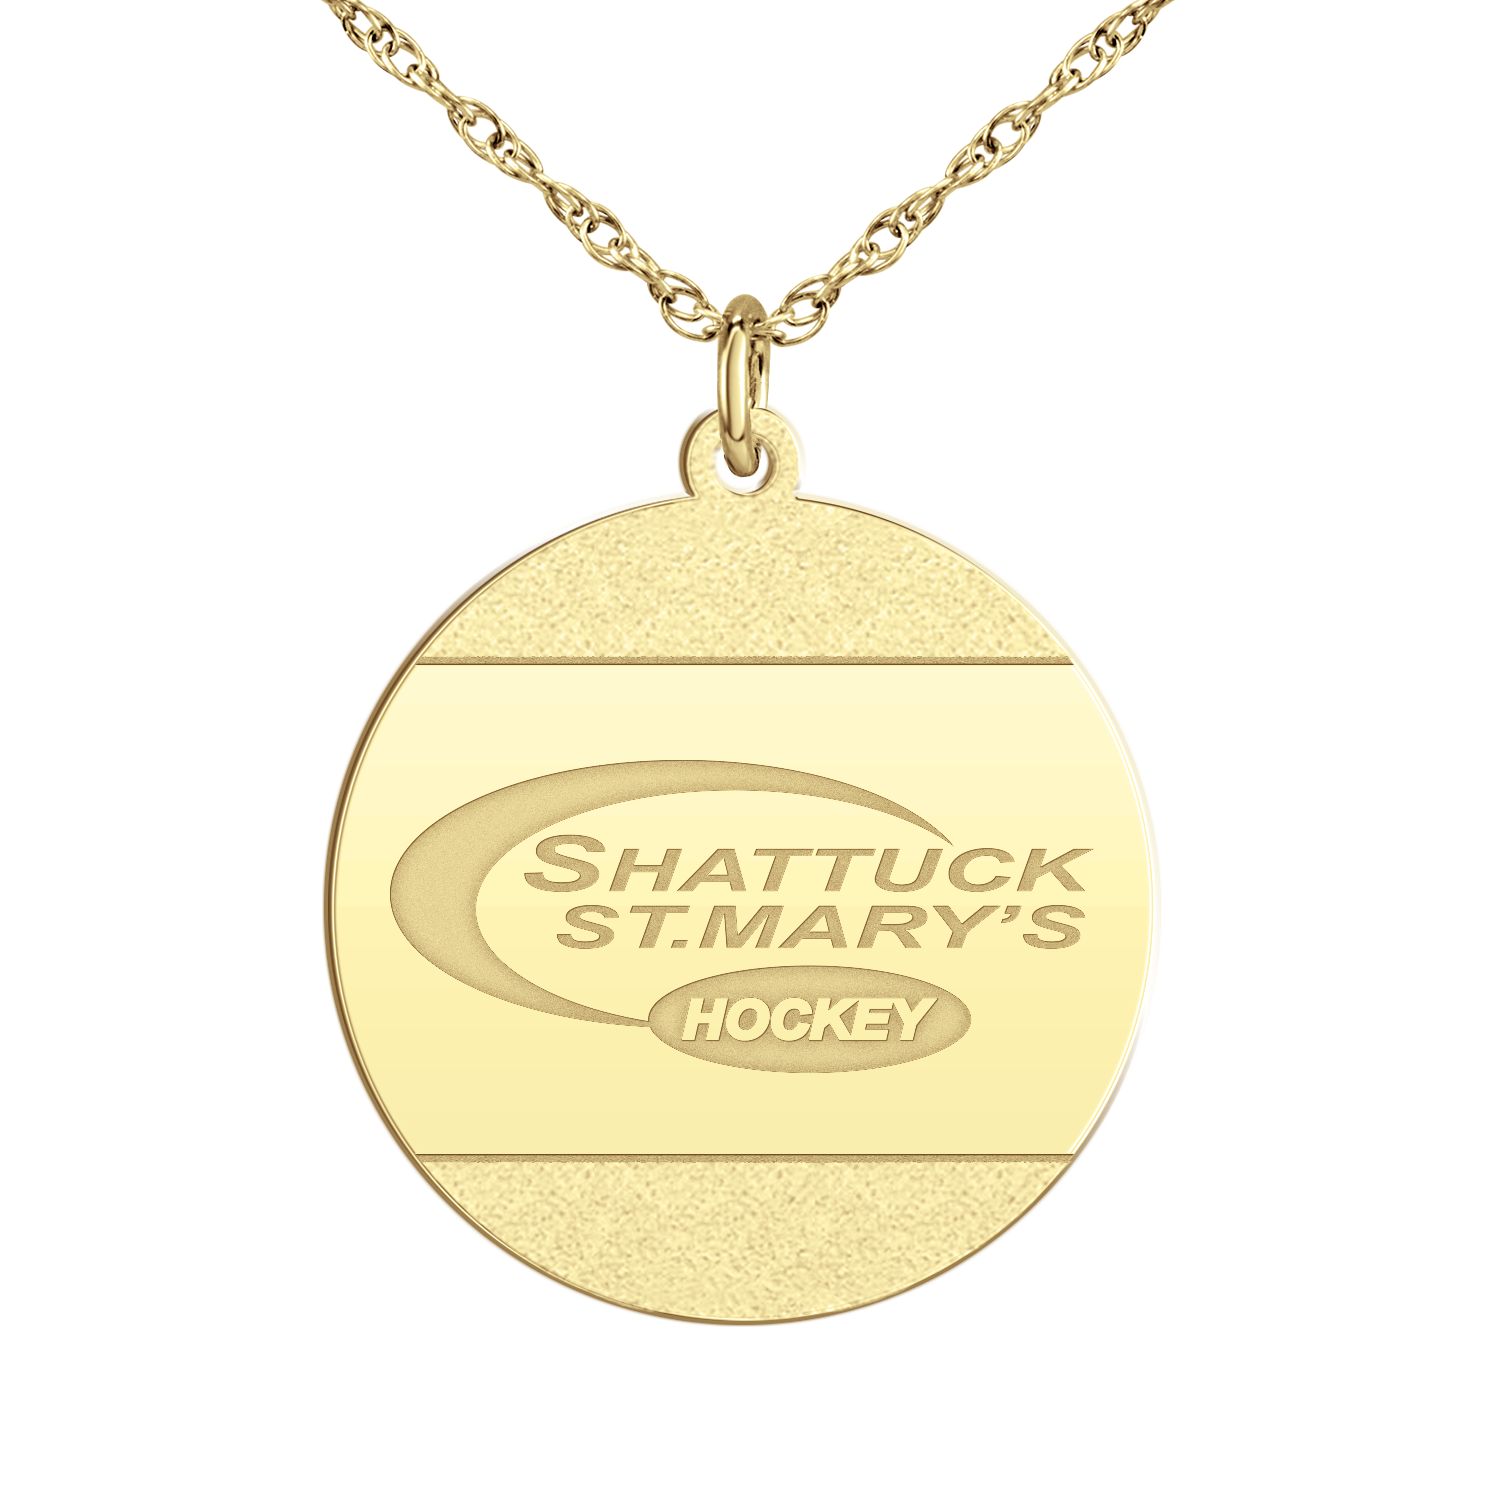 Shattuck St Mary’s ICED Signature Disc Large